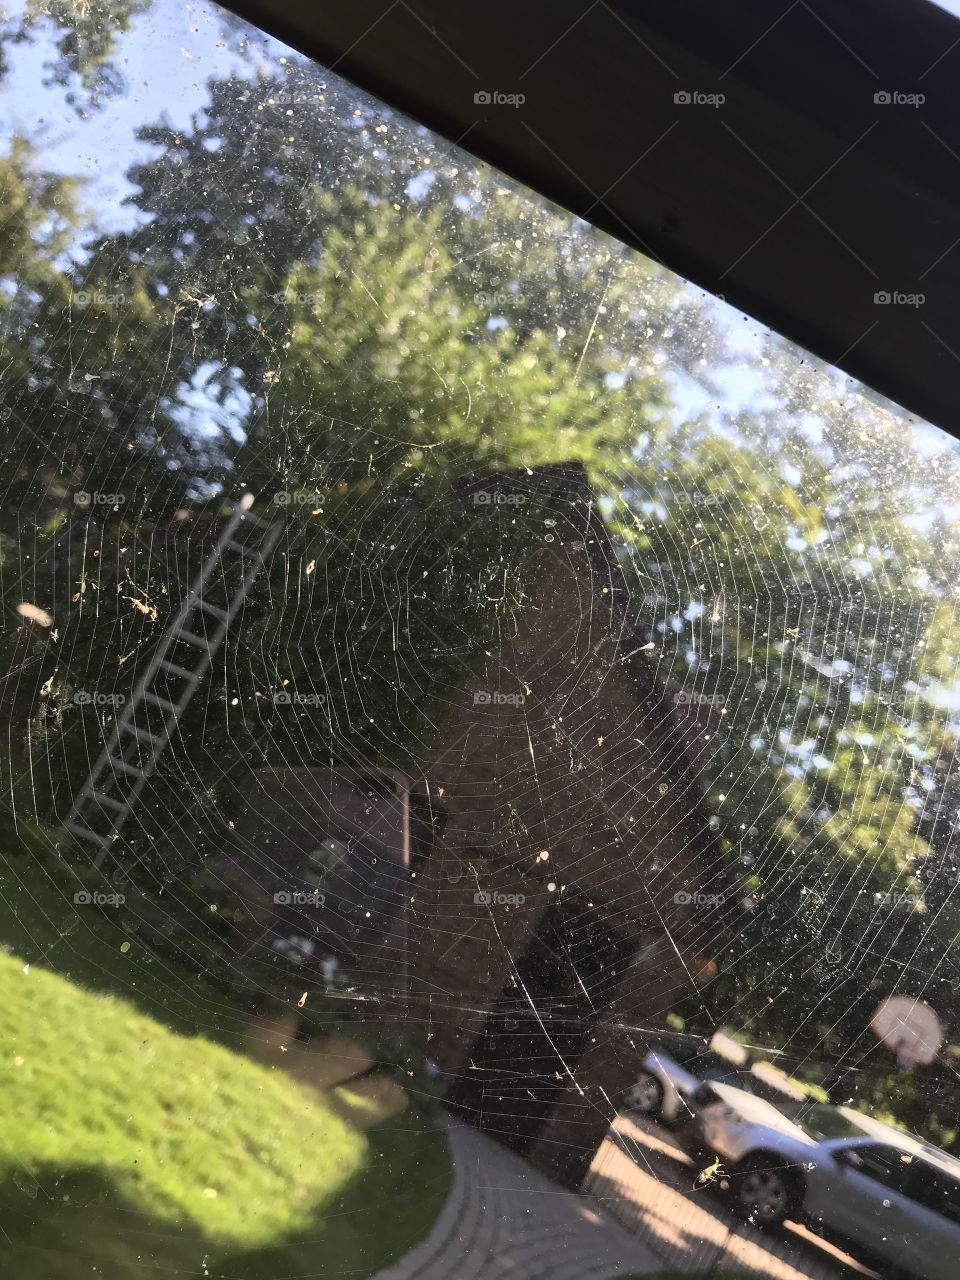 A very diligent spider’s web!